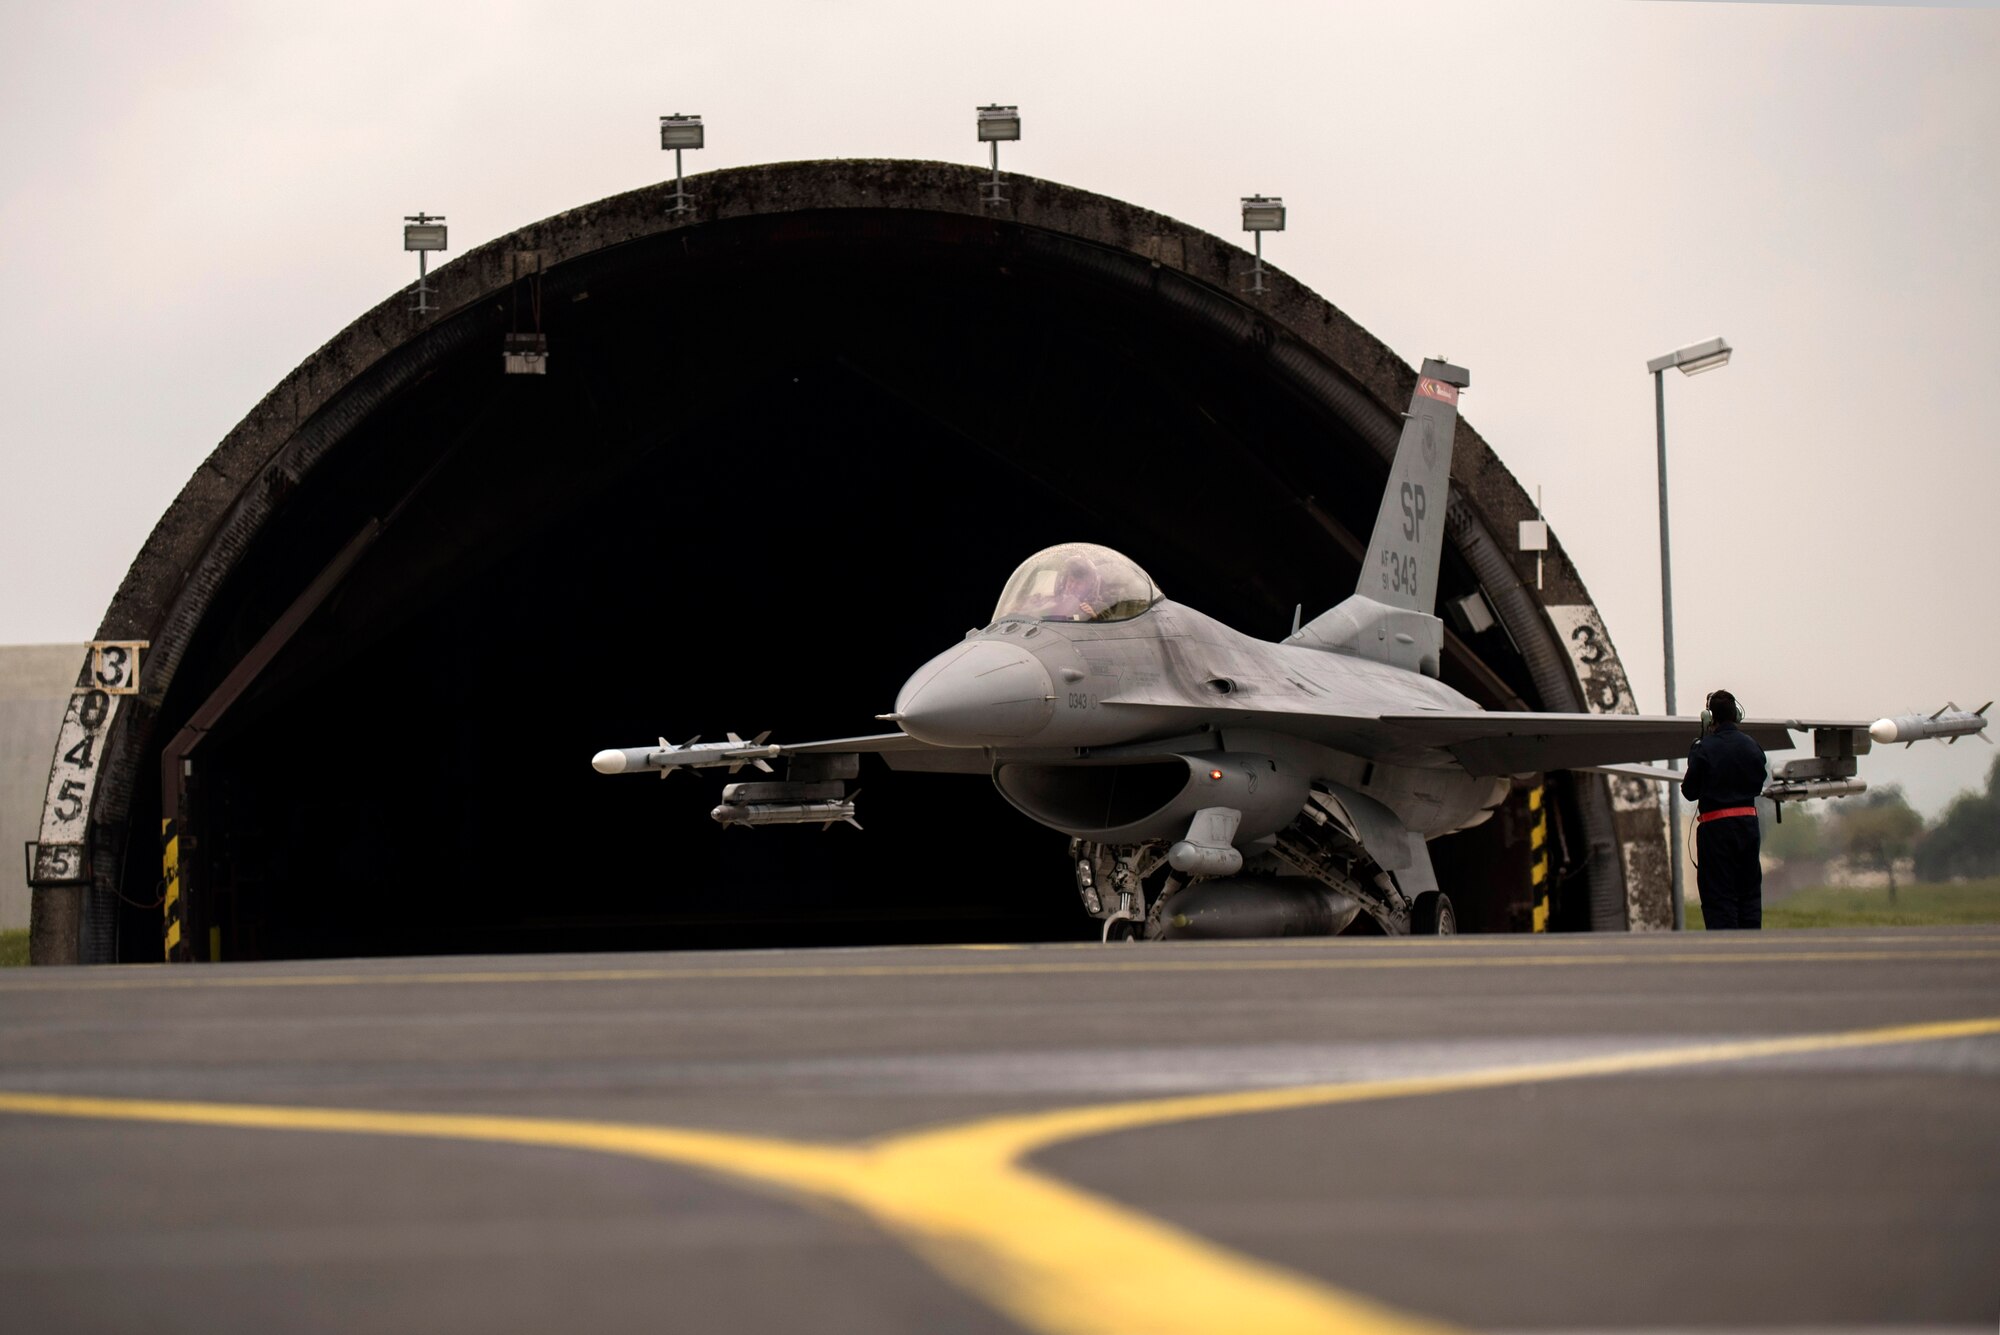 A U.S. Air Force F-16 Fighting Falcon assigned to the 480th Fighter Squadron prepares to taxi to the runway during a "14 front" launch at Spangdahlem Air Base, Germany, May 4th, 2017. From April 24 to May 5, the 480th FS and 52nd Aircraft Maintenance Squadron supported 26 sorties a day, 14 in the morning and 12 in the afternoon. This flying tempo is referred to as a, “14 turn 12,” and is a 16 percent increase over normal operations. During normal operations, it’s standard to launch a 12 turn 10, or 4 fewer sorties per day. Preparing and launching 14 aircraft in one go is referred to as a “14 front.” (U.S. Air Force photo by Preston Cherry)